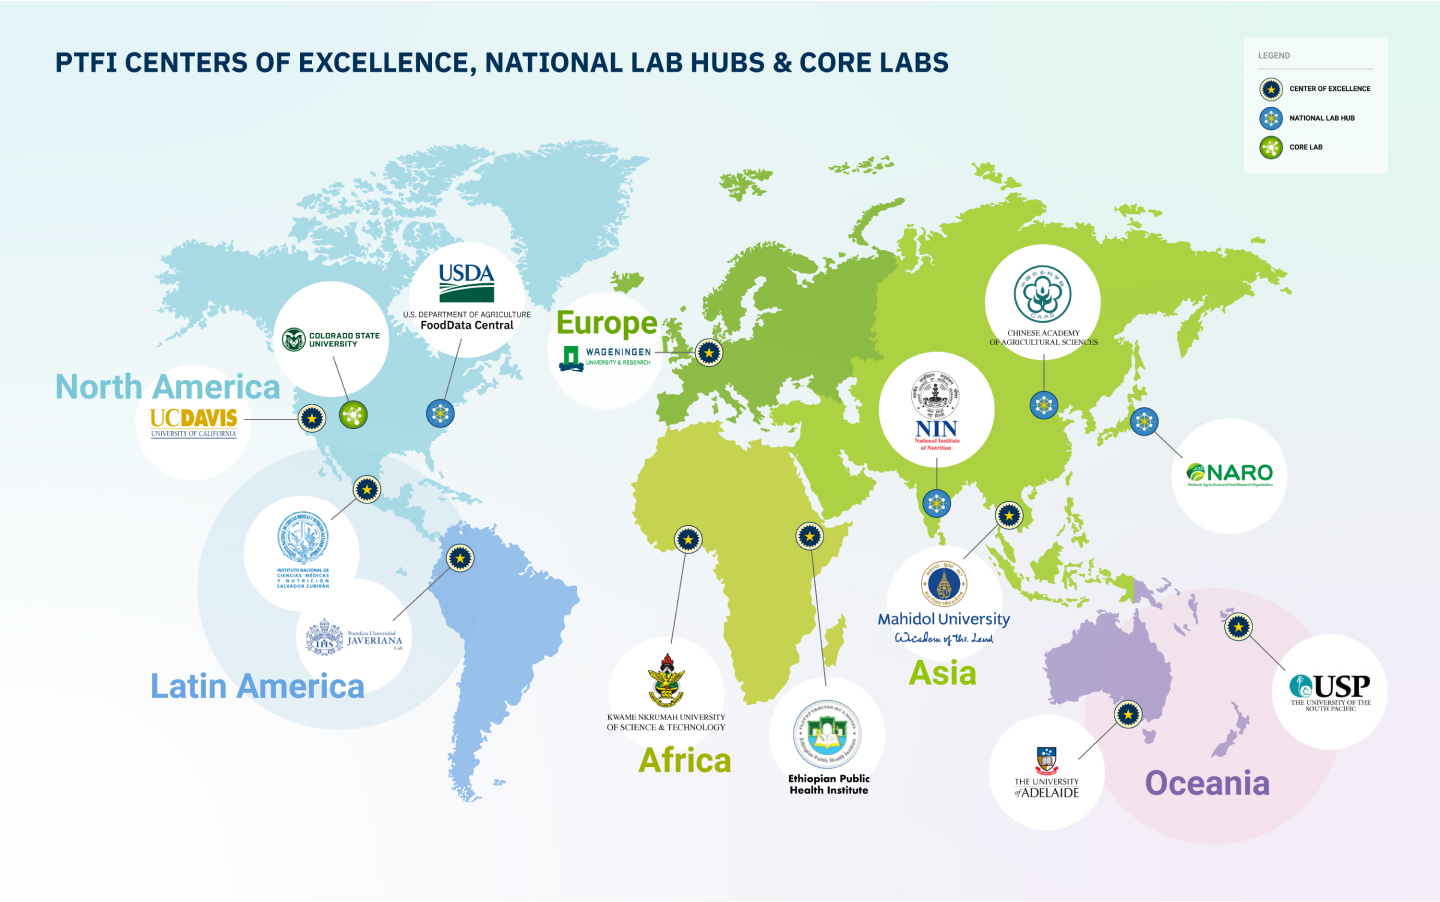 Map showing the locations of PTFI Centers of Excellence, National Lab Hubs, and Core Labs